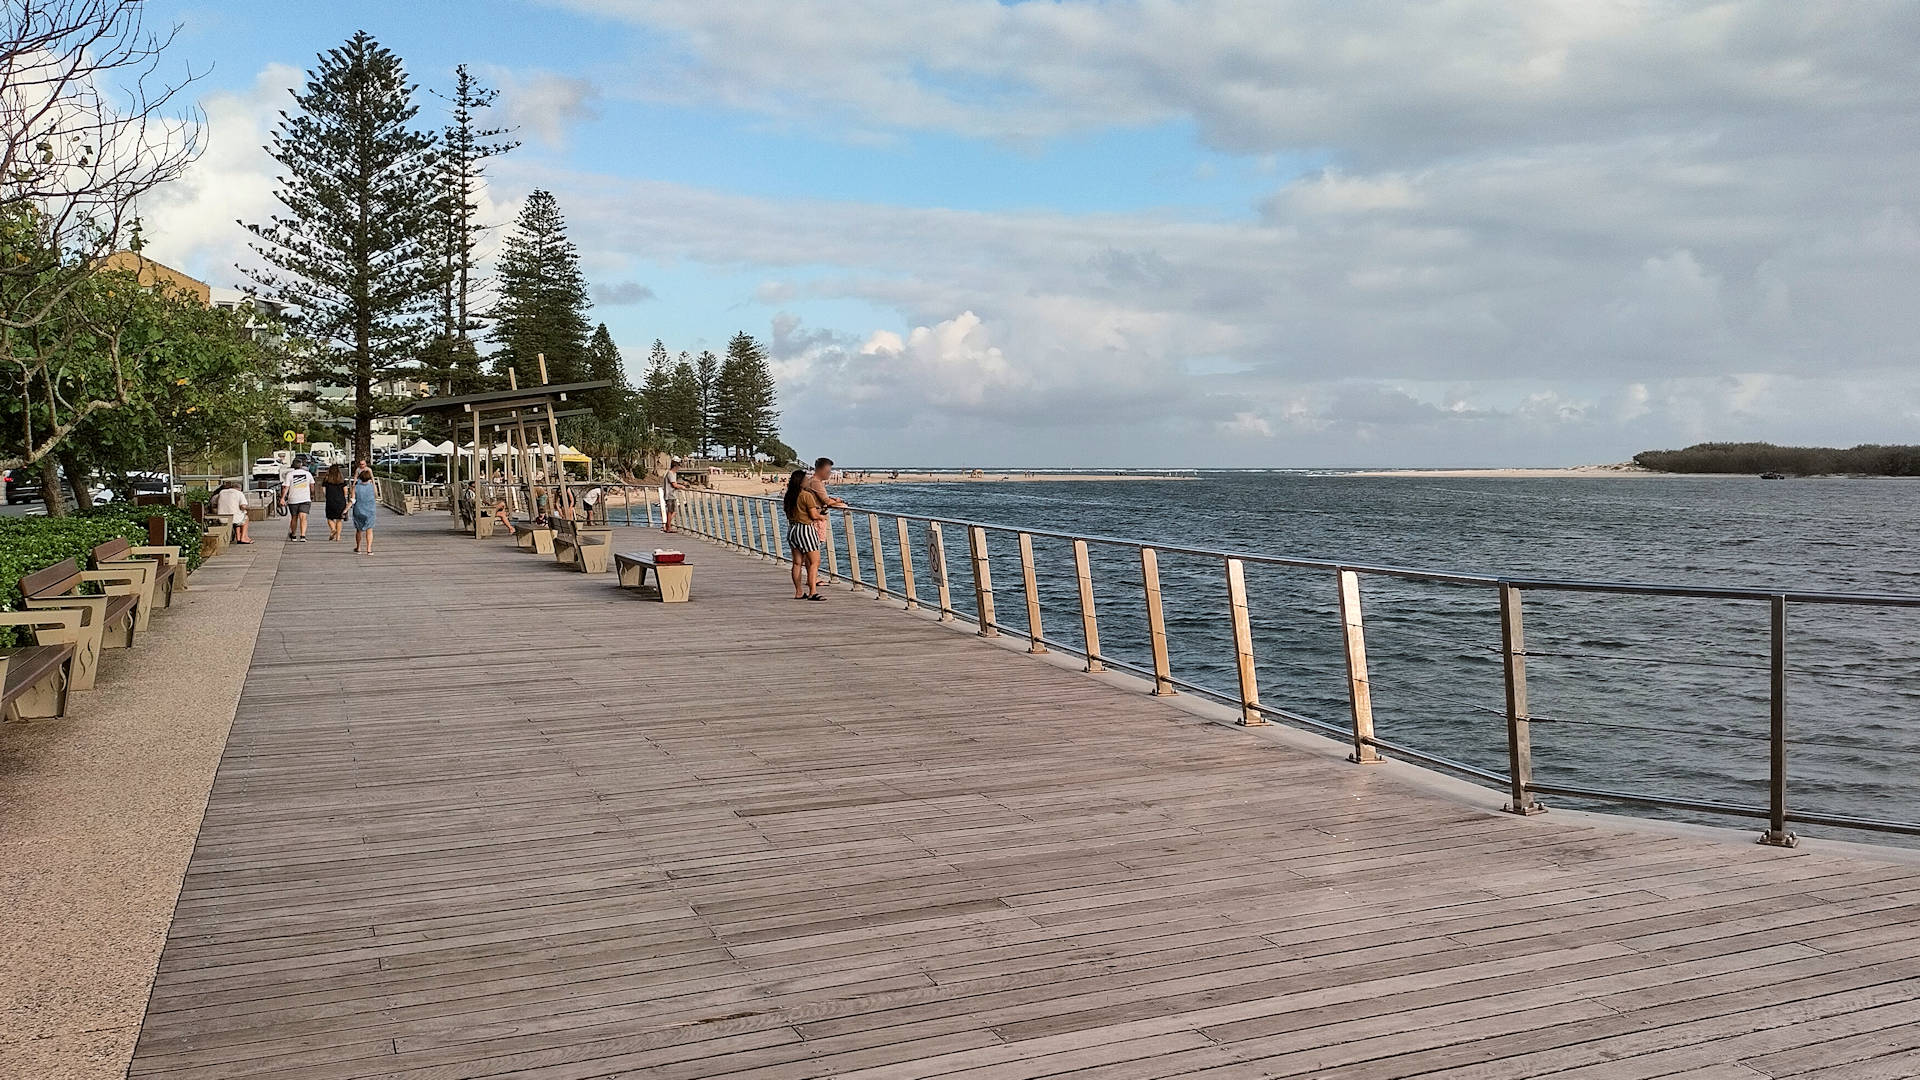 Boardwalk on the edge of a wide river looking towards the mouth to the ocean